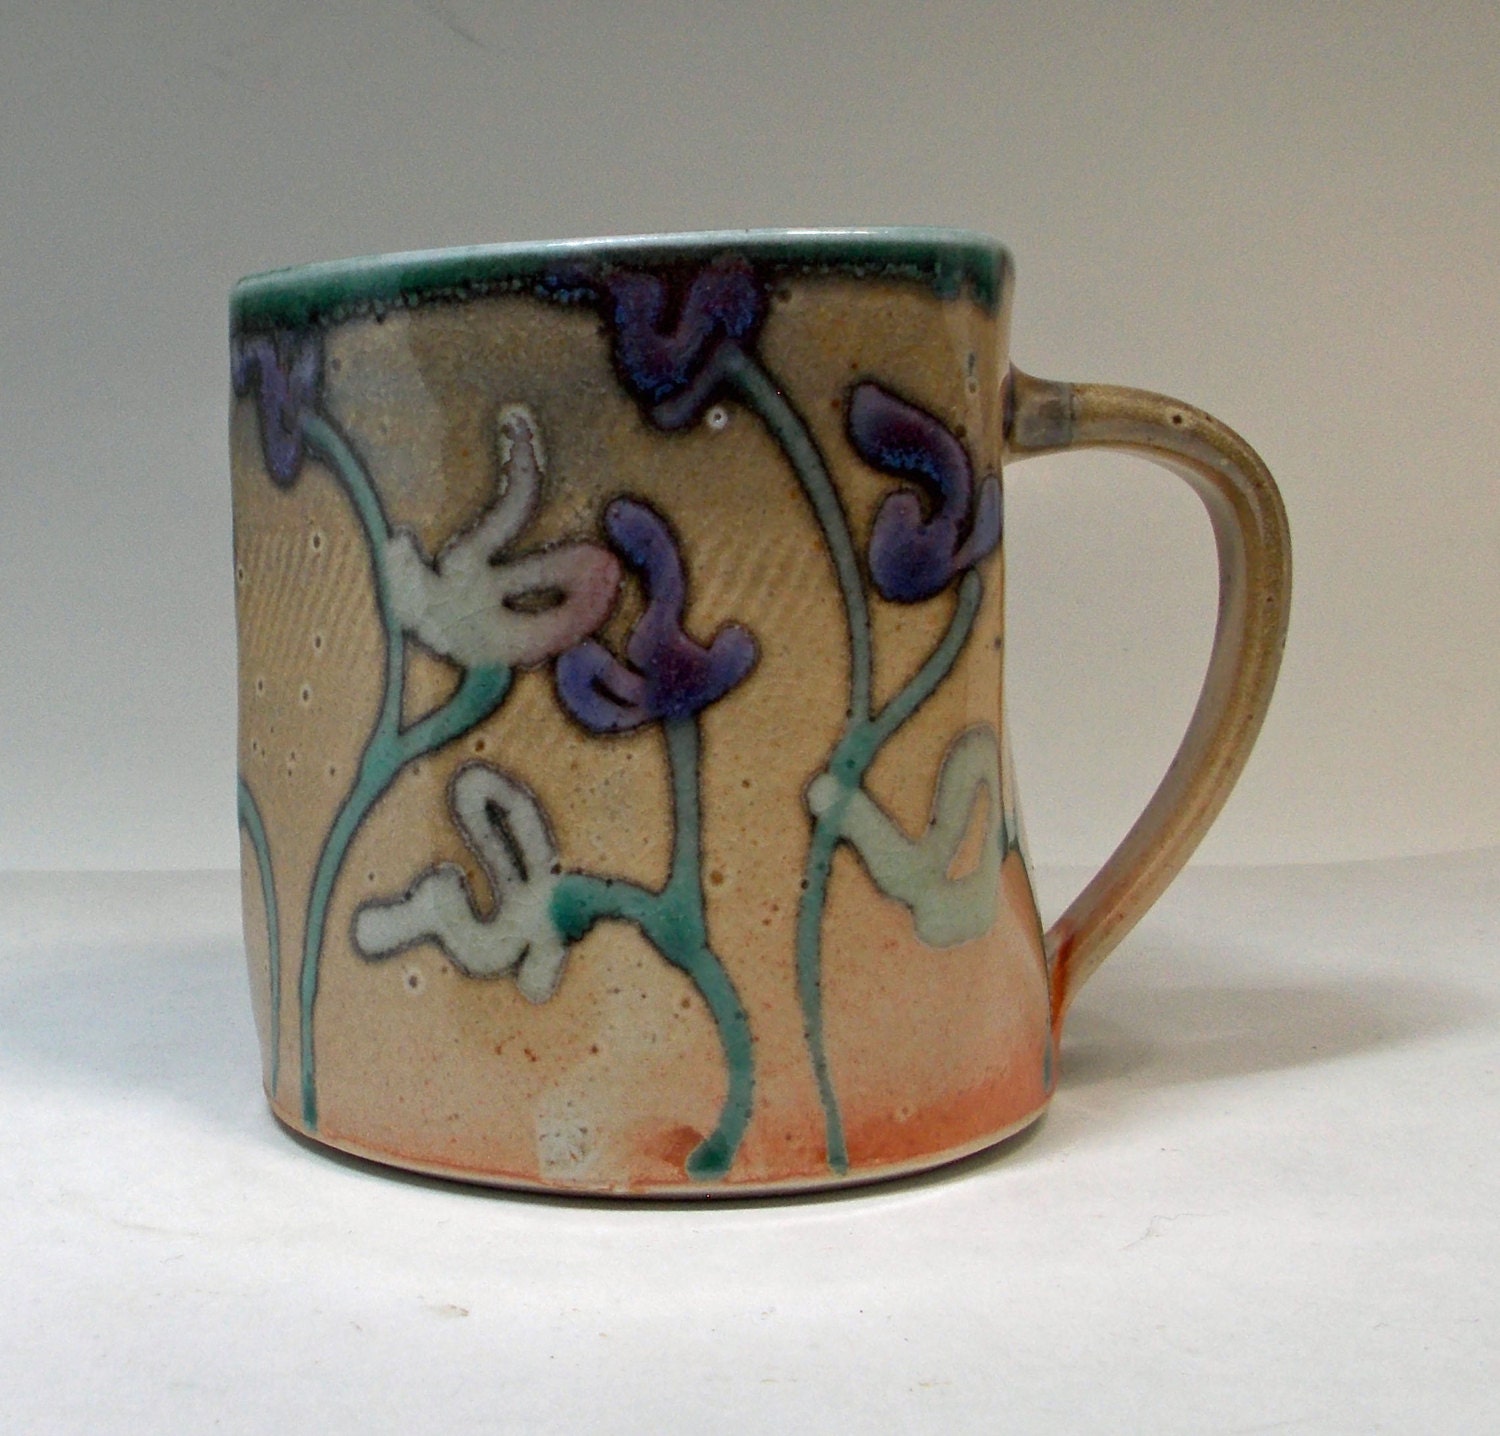 shino cup with purple and green flowers and a jade green interior - BlackForestPottery